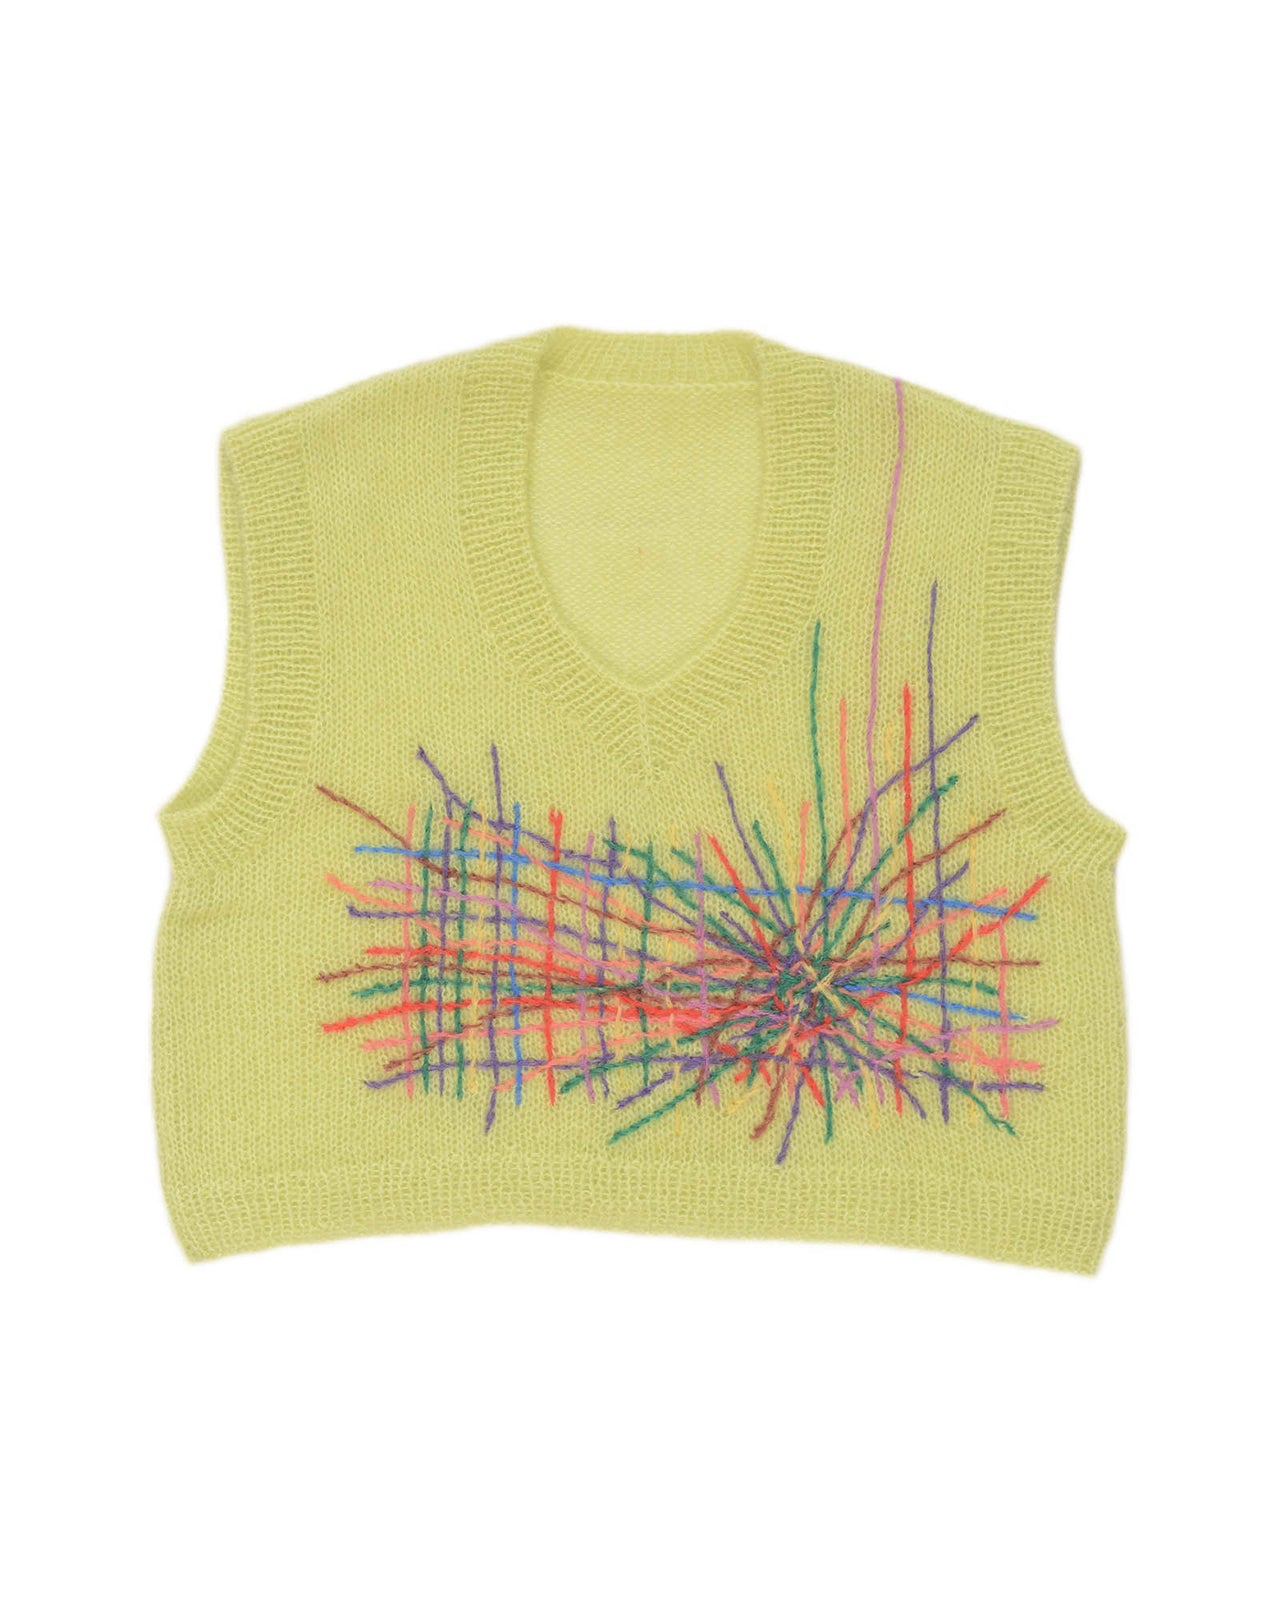 Yellow mohair vest laid flat on white background. The vest has a multitude of colourful embroidered lines in its center.